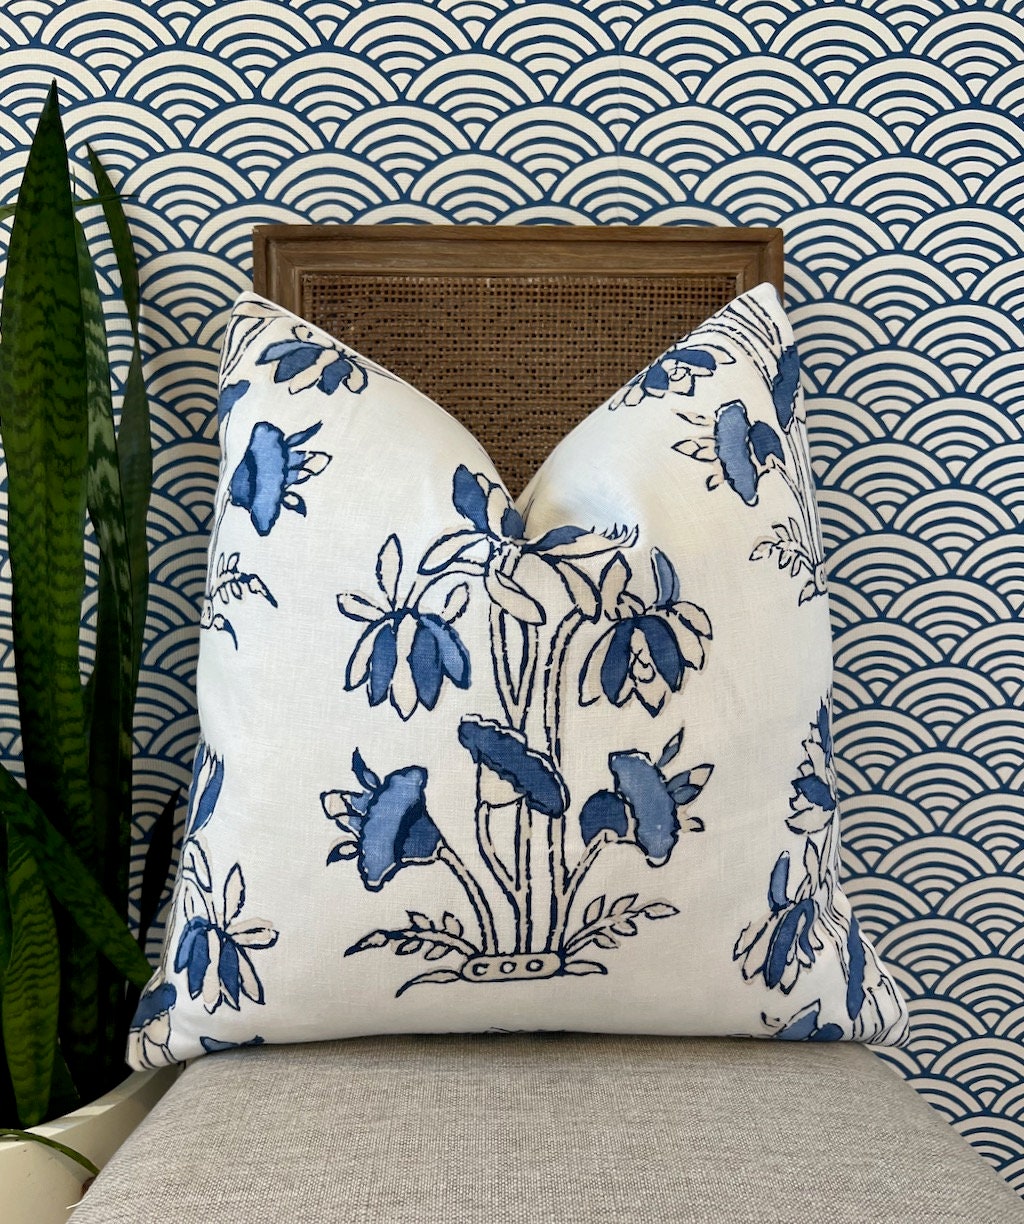 Thibaut Lily Flower Pillow in Blue and White. Designer Pillows, Accent Floral Pillow in Blue,  Euro Sham Cushion Cover, High End Pillows